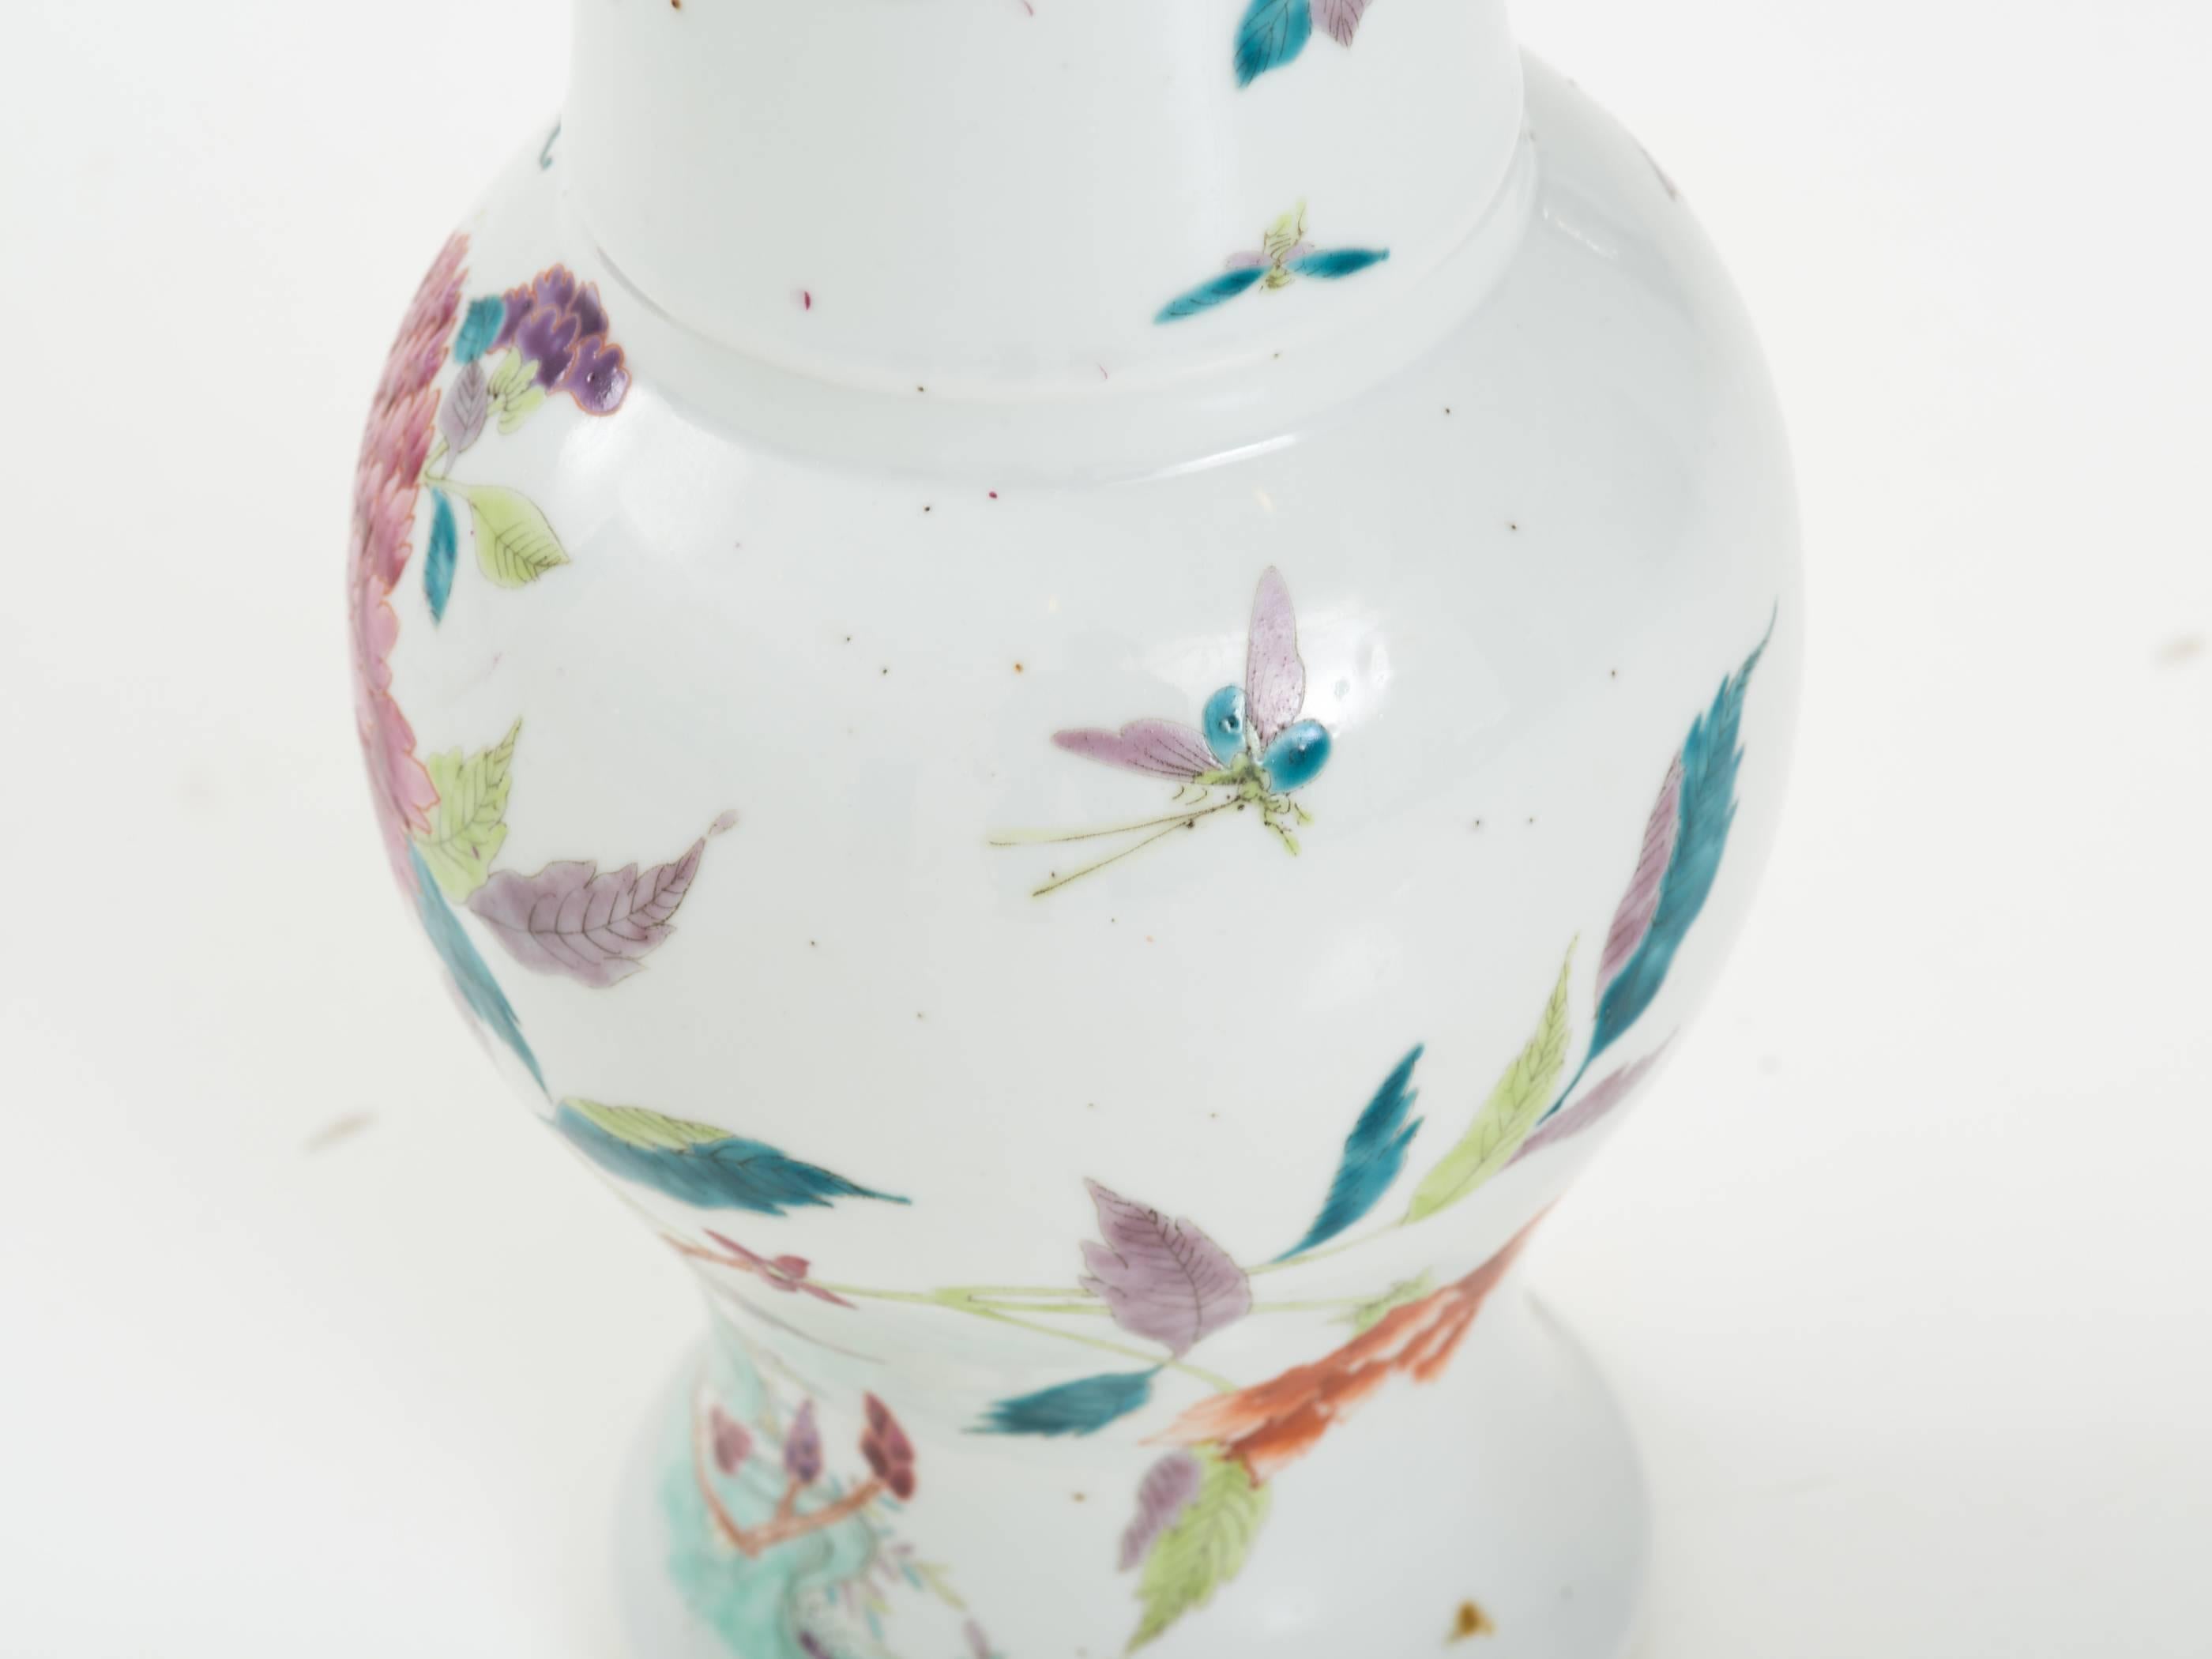 Chinese Qing dynasty famille rose enamel porcelain vase of Yenyen form porcelain vase of Yenyen for decorated with peonies. Bearing the Yongzheng mark.